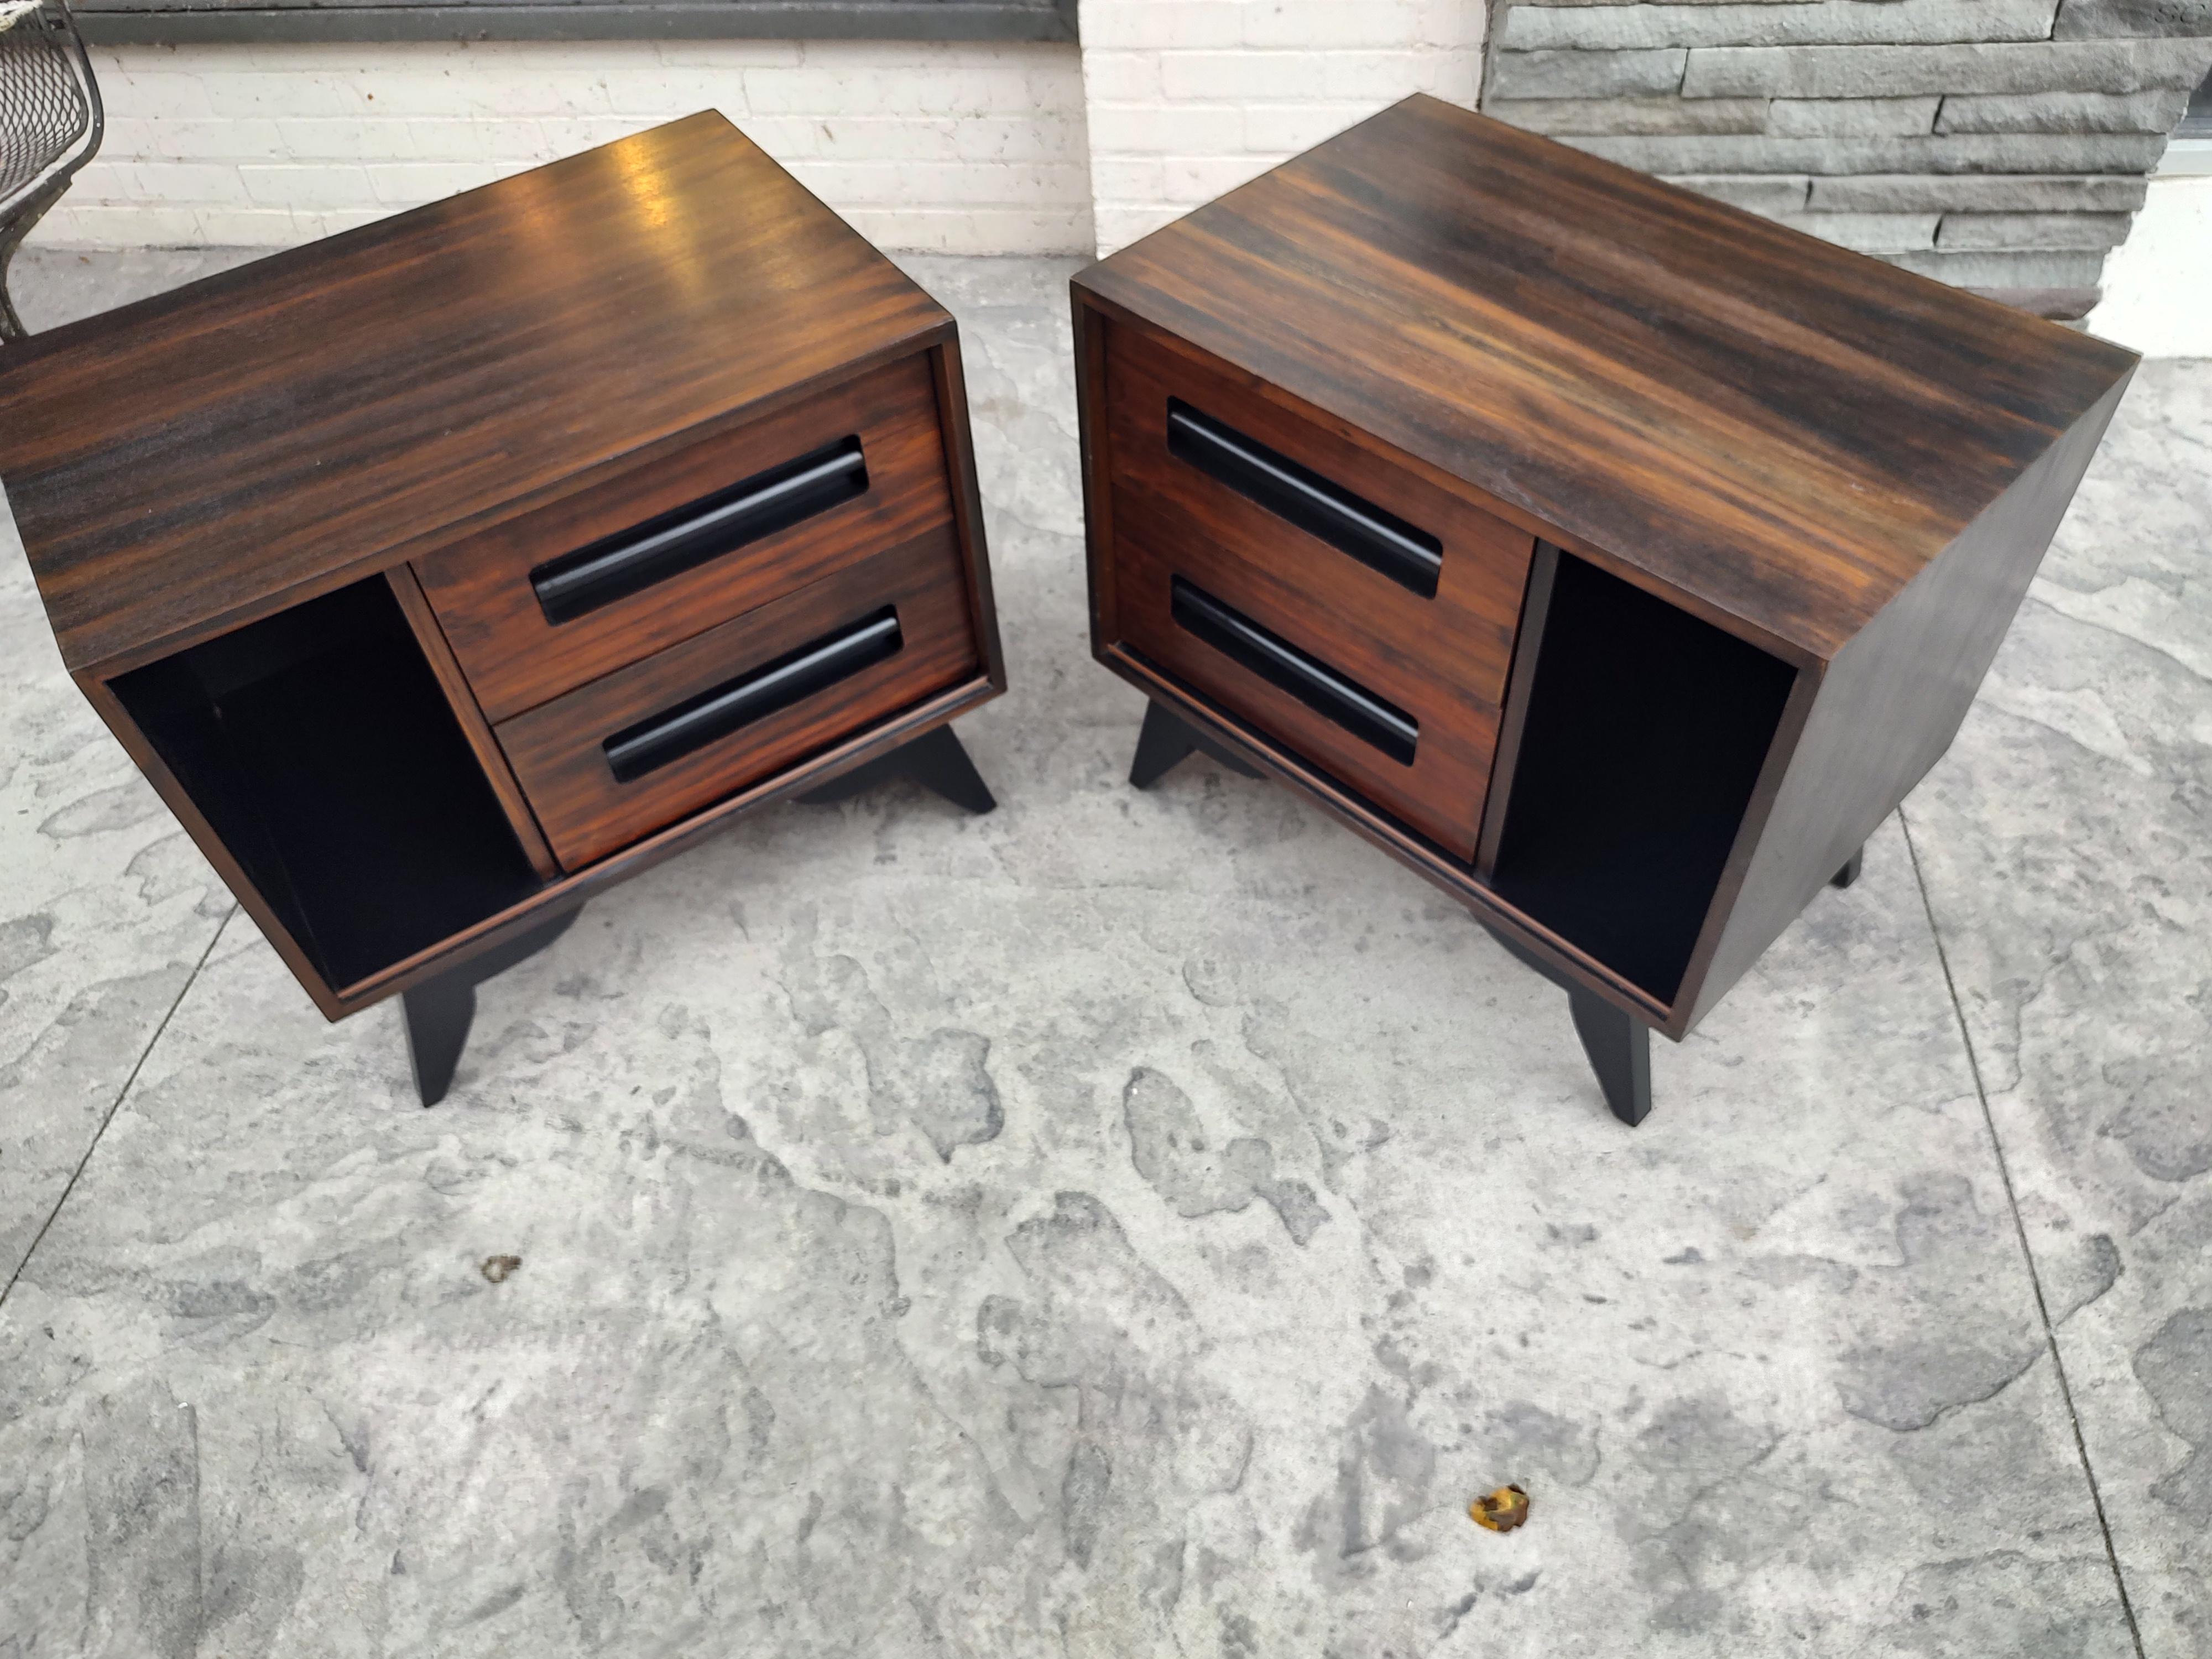 Pair of Mid-Century Modern Danish Rosewood & Black Lacquer Nightstands C1970 For Sale 8